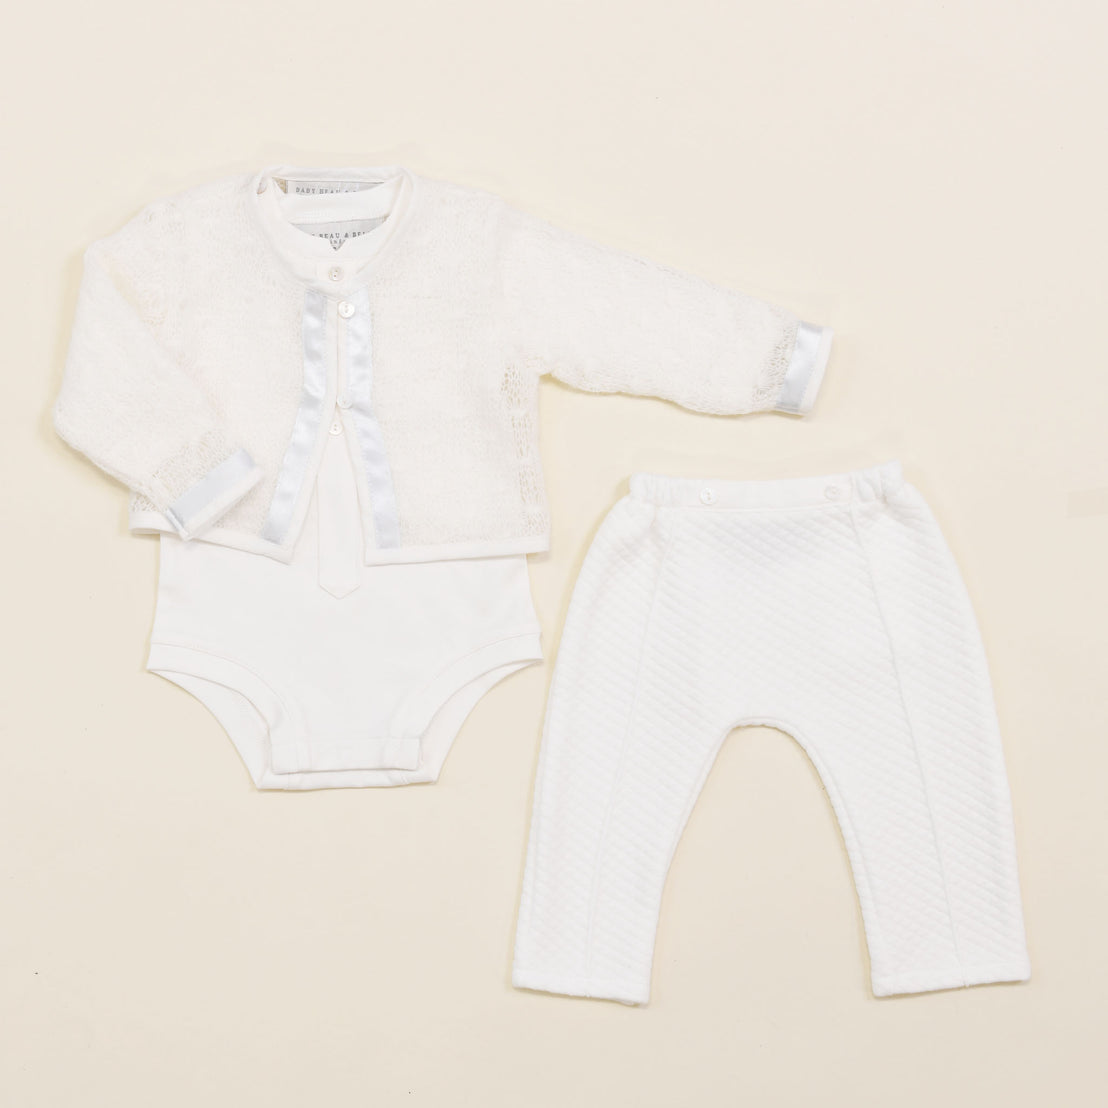 Flat lay photo of the Owen 3-Piece Suit, including the Sweater, Pants, and Onesie